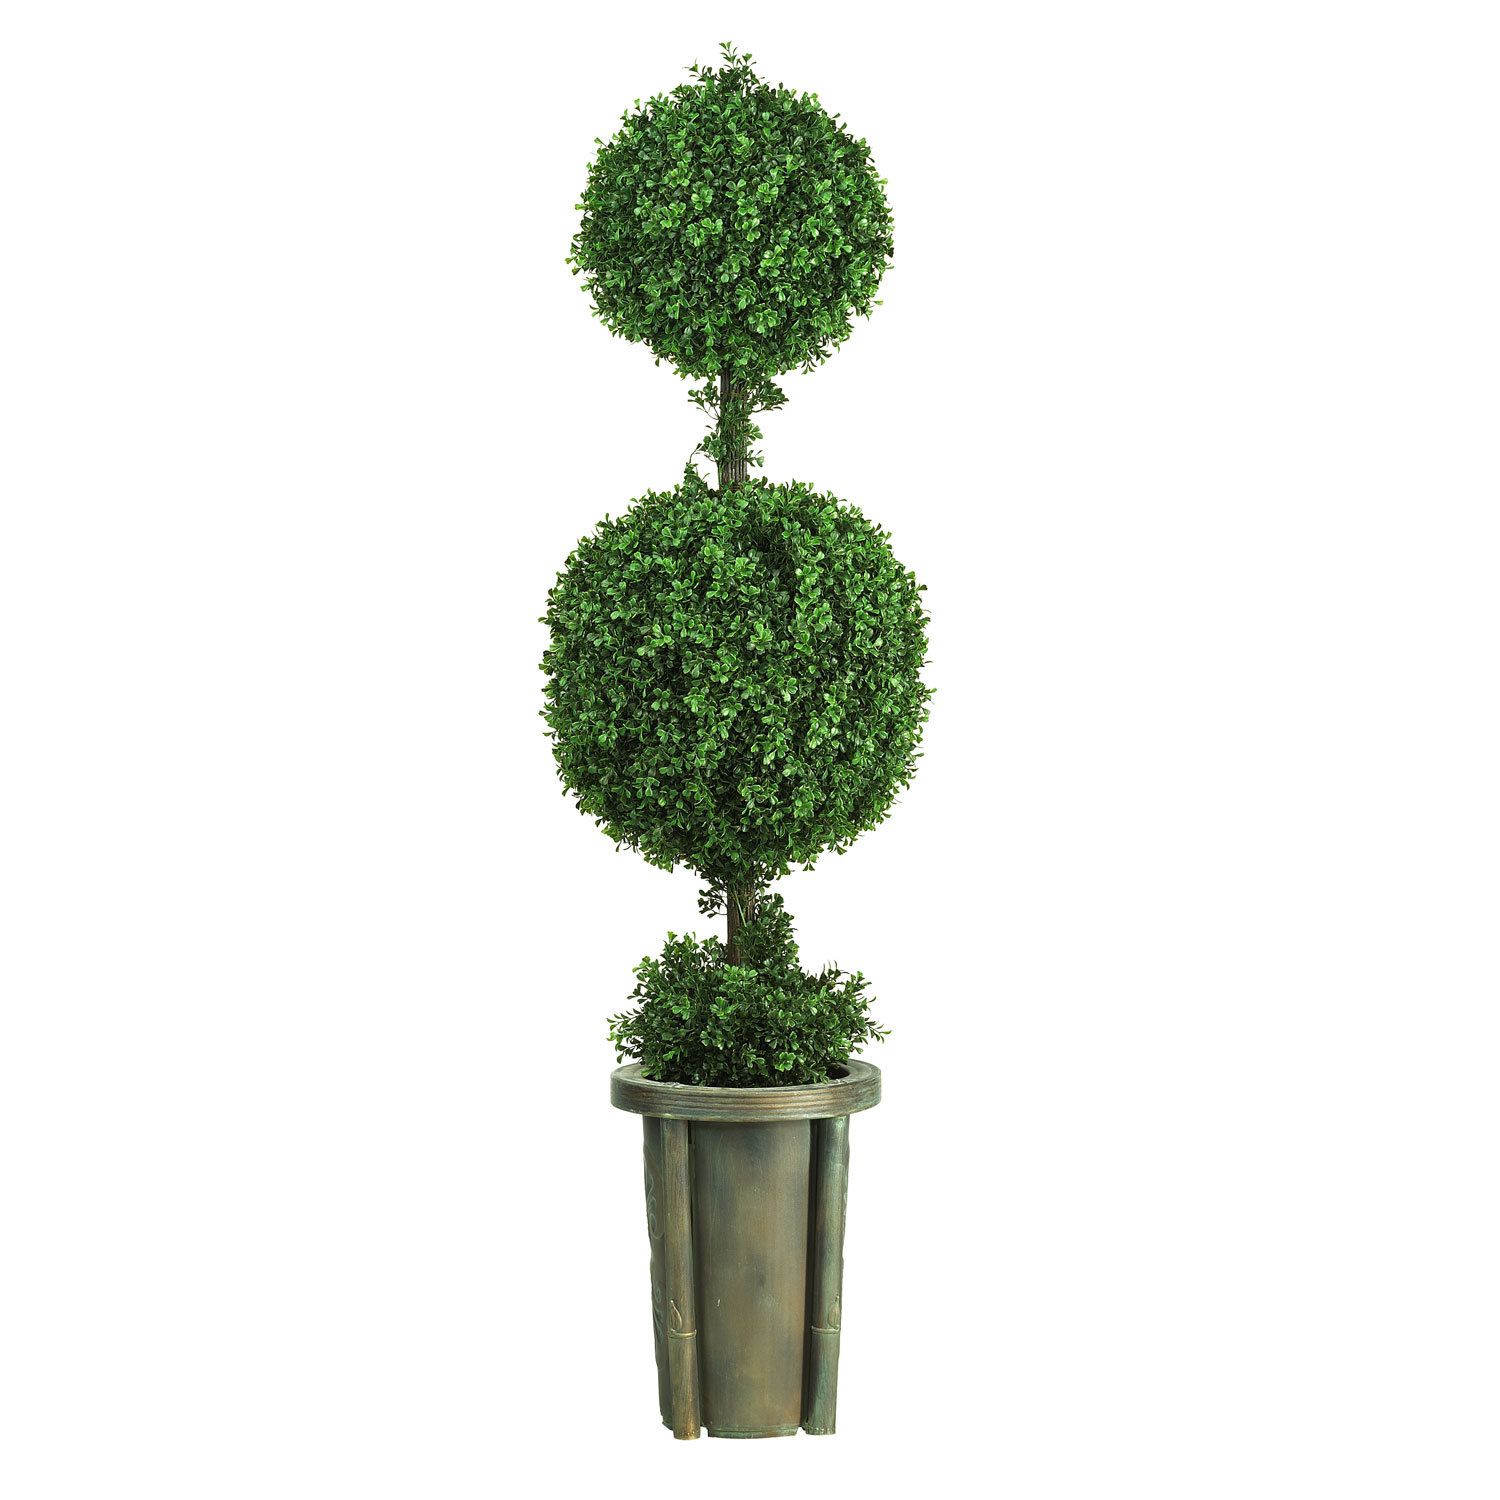 5 Foot Double Ball Leucodendron Topiary In Decorative Vase